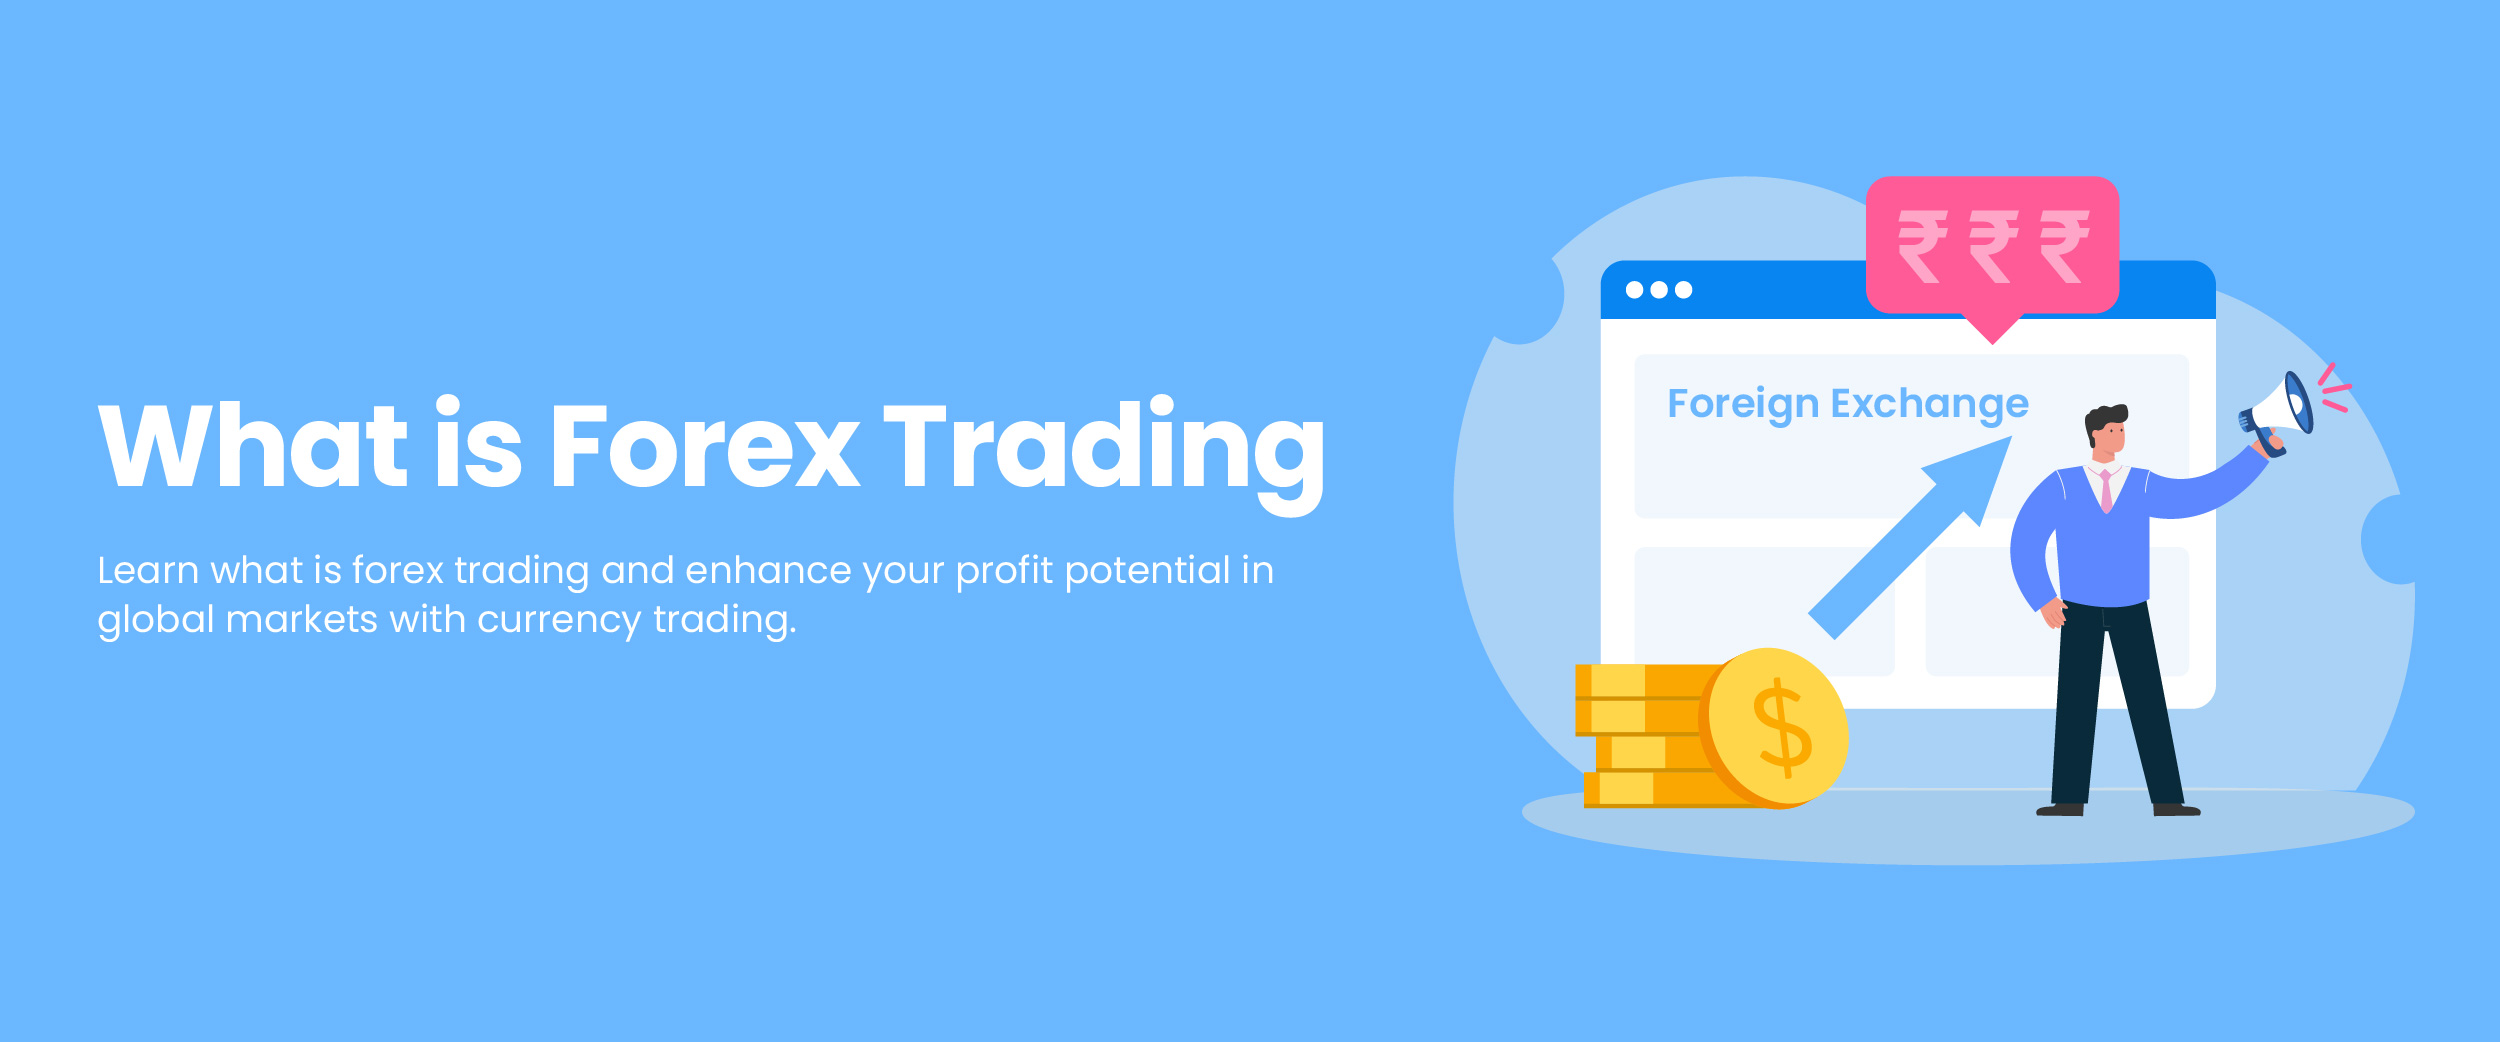 Anyone use exness for forex trading